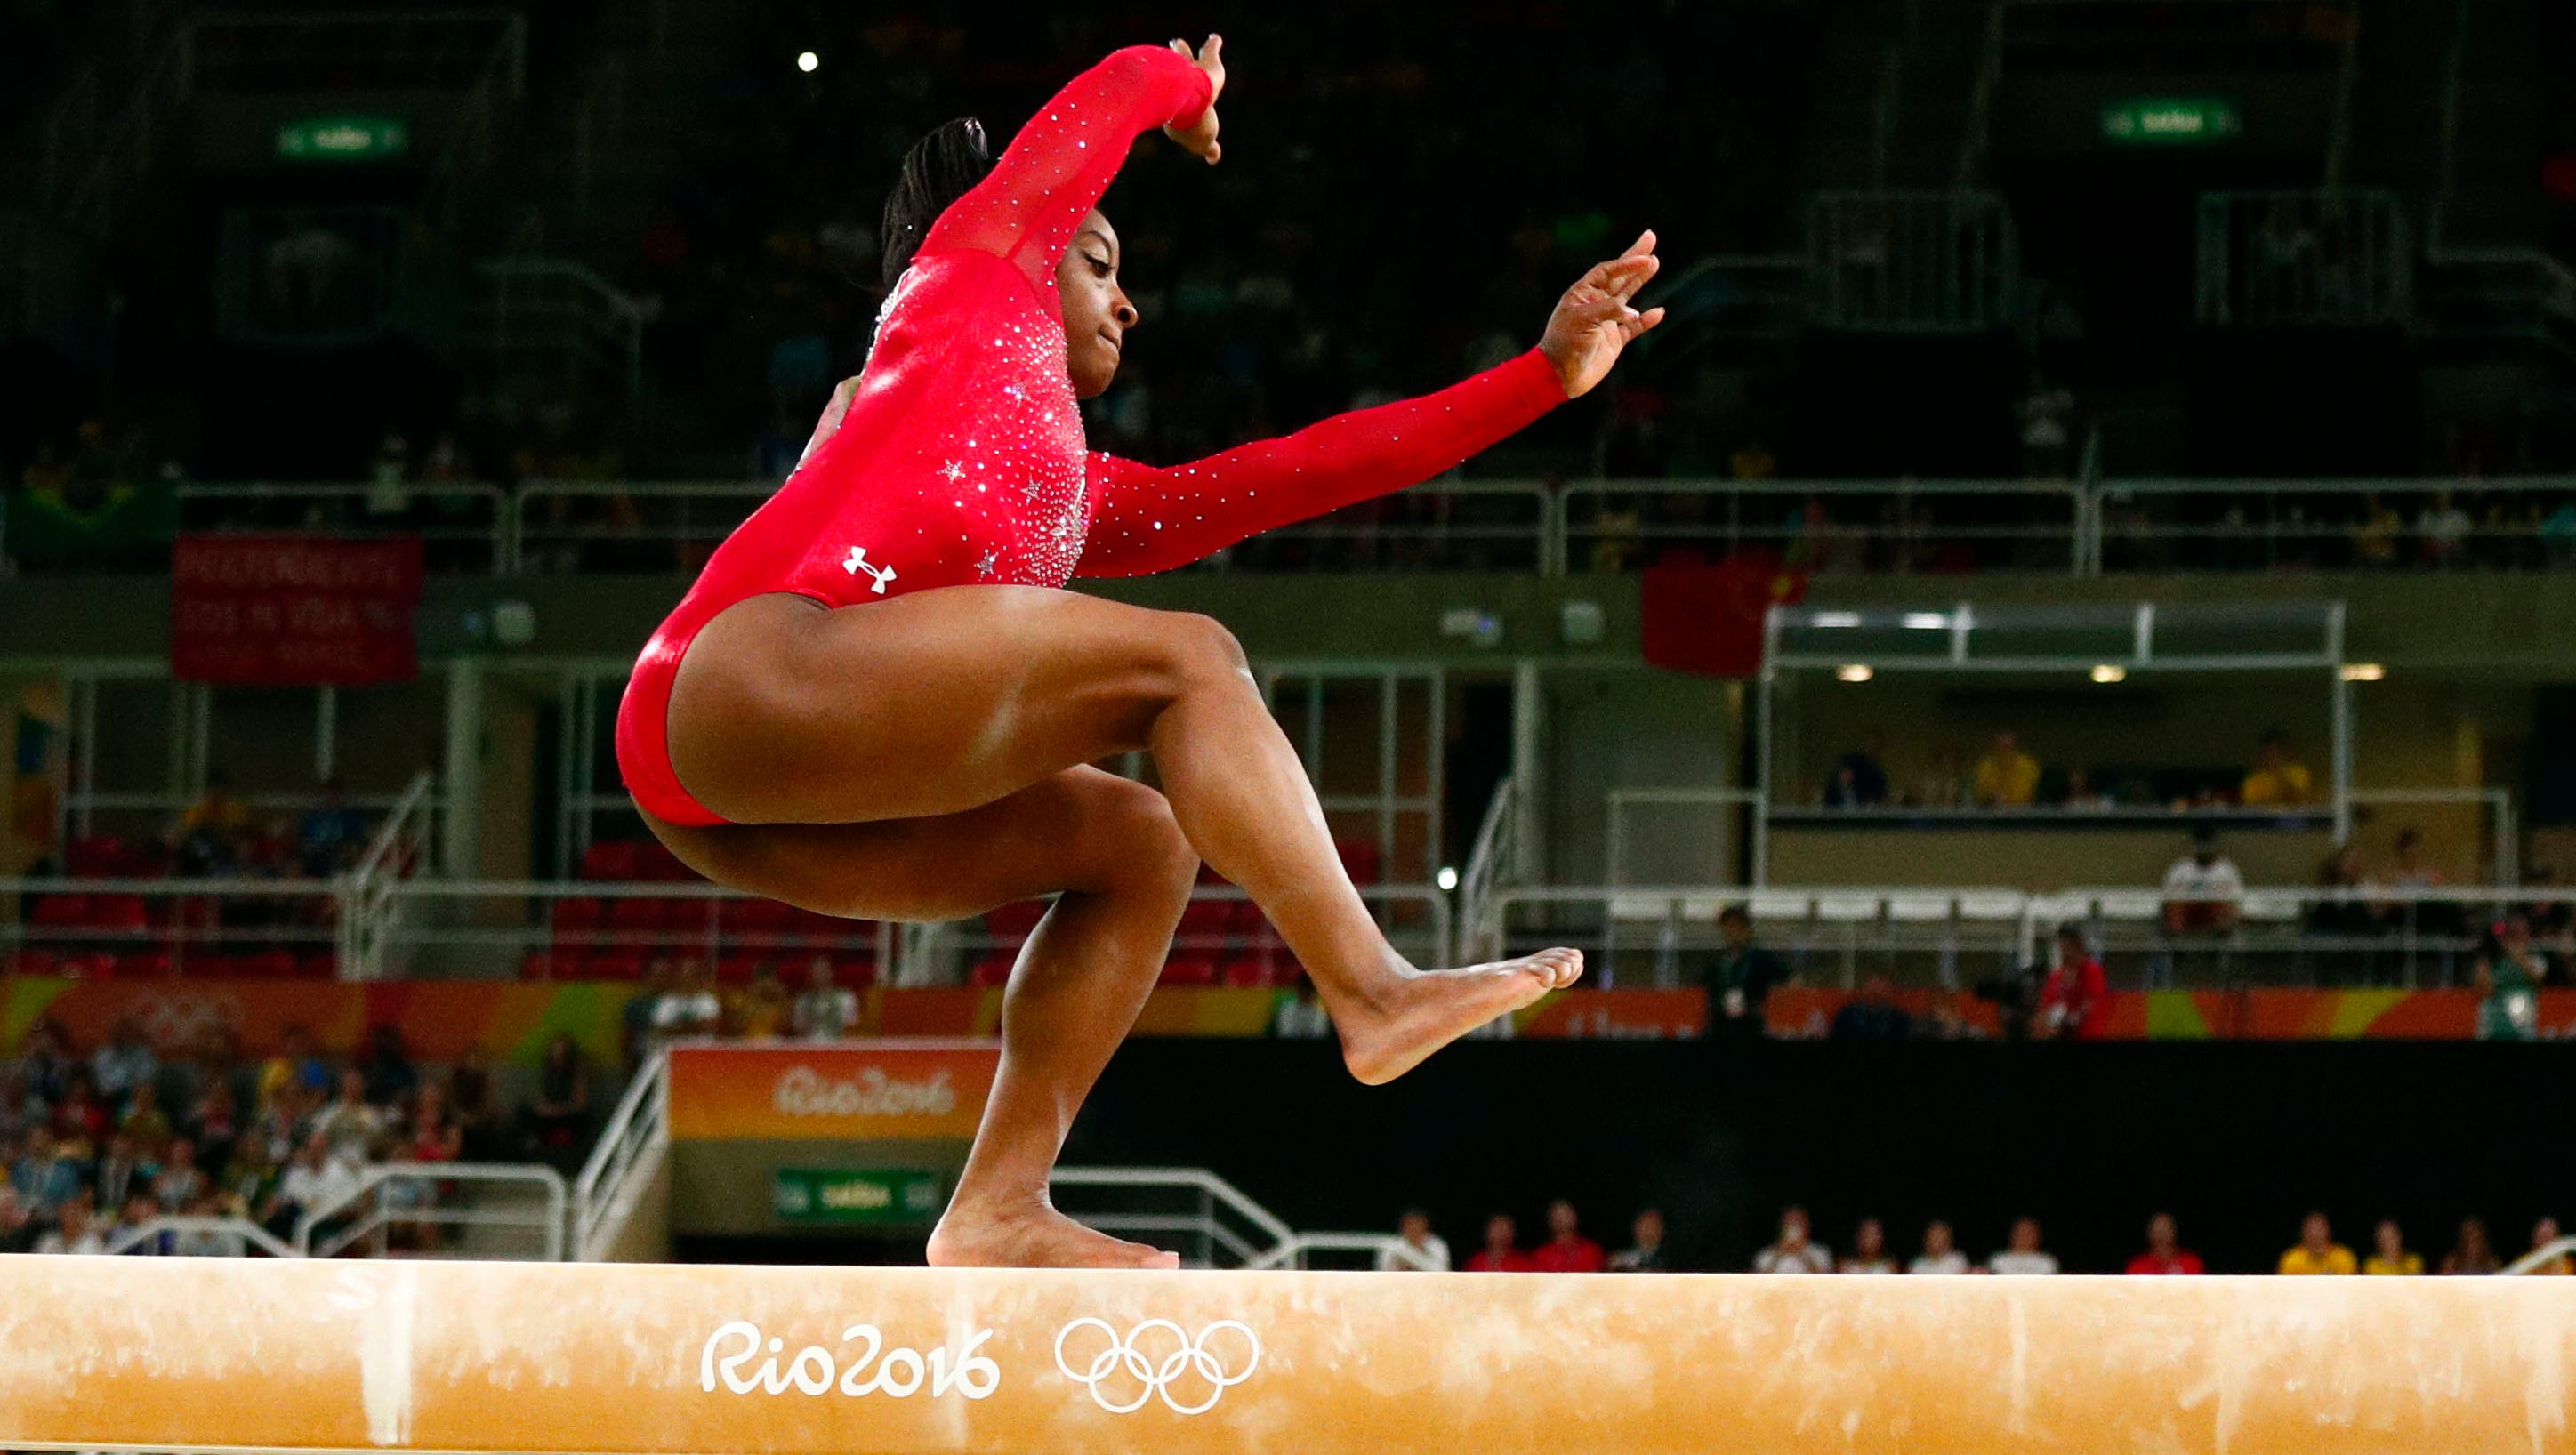 Usas Simone Biles Disappointed By Mistake Not Medal With Bronze On Beam 